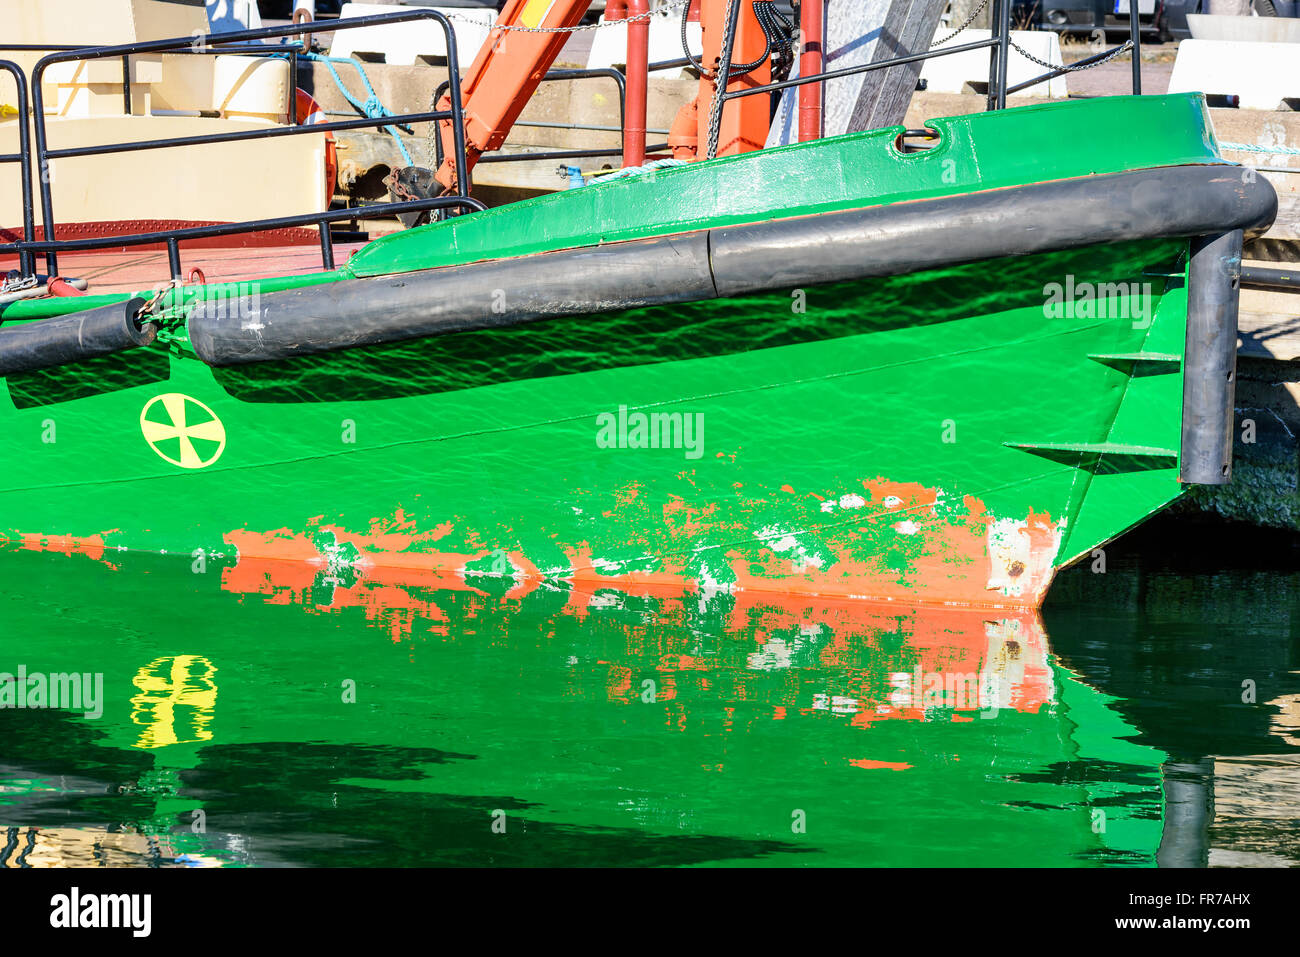 A green boat keel with black rubber bumpers in reflective water. Stock Photo